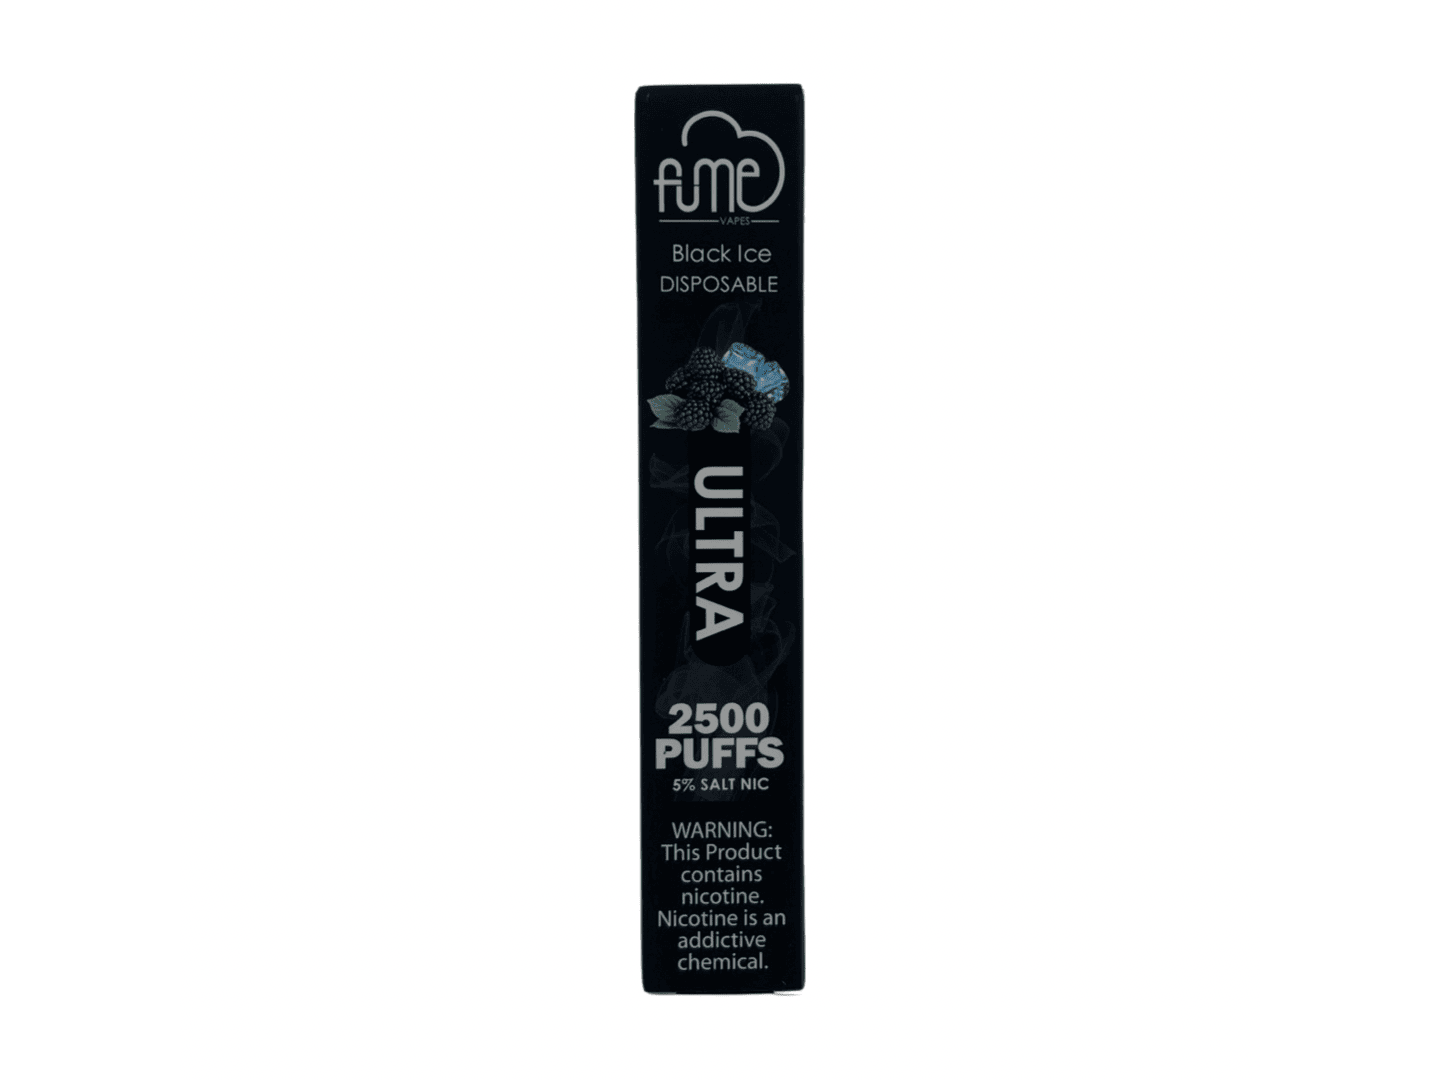 Fume Ultra Black Ice Front packaging 